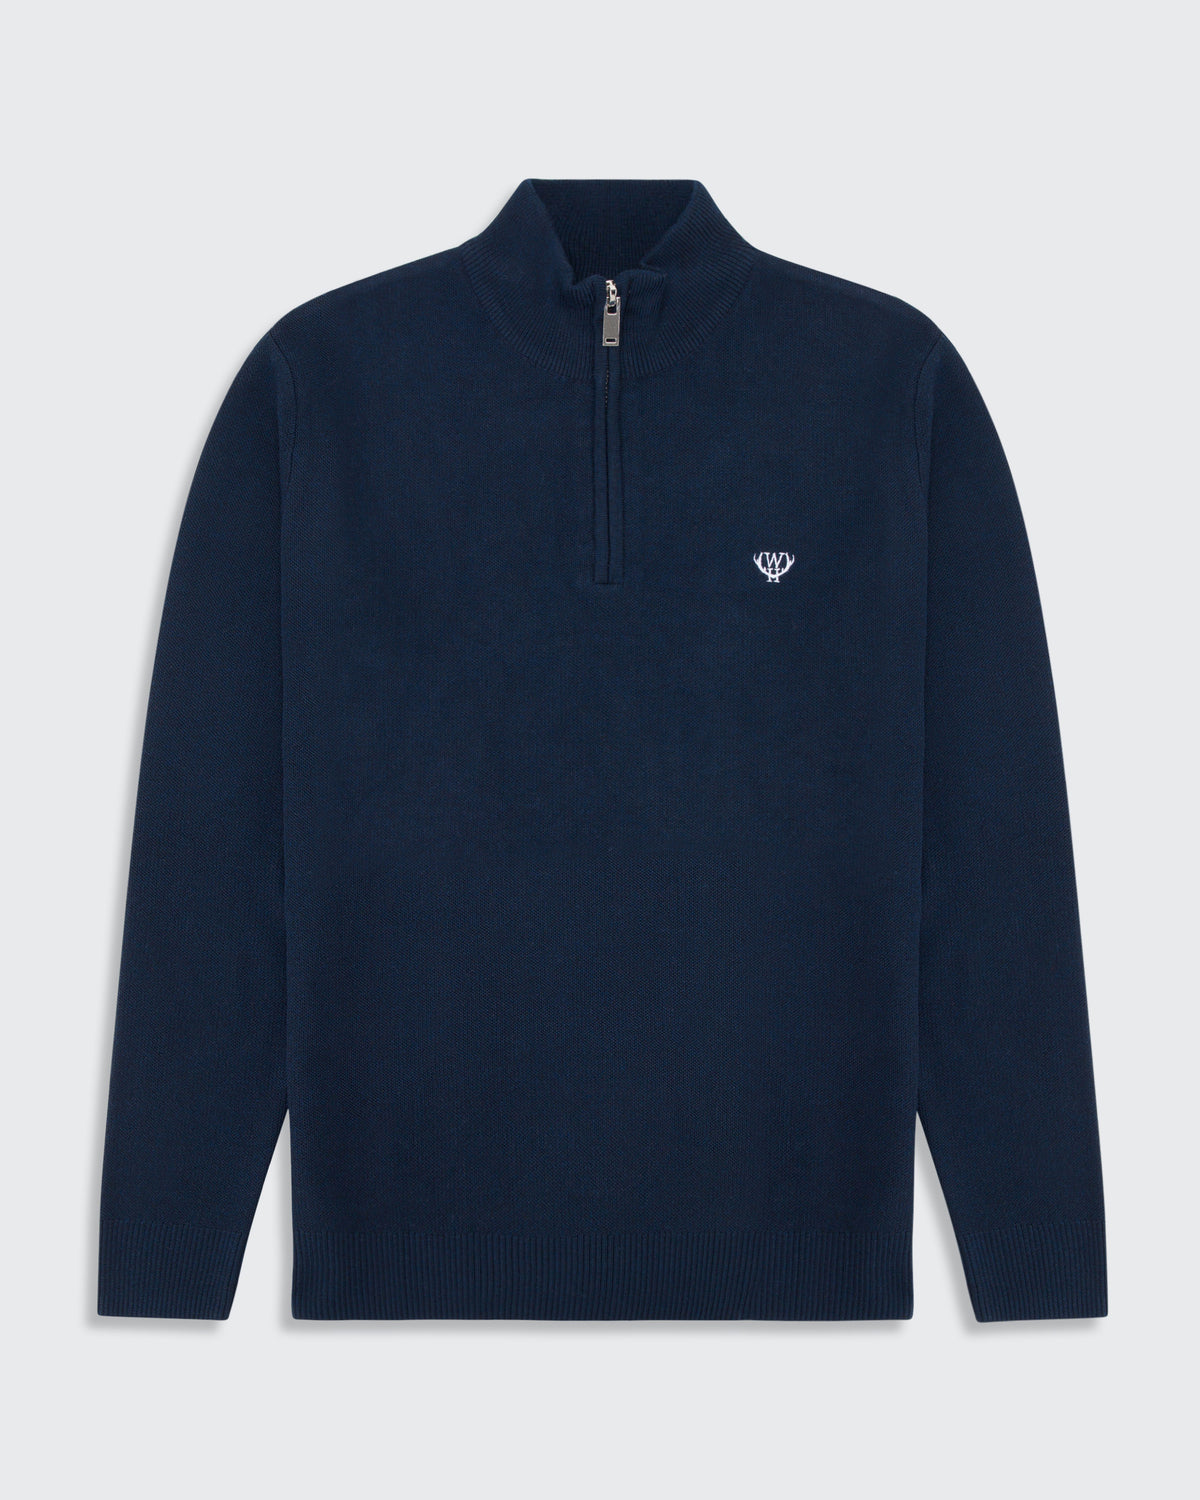 Navy Knitted 1/4 Zip